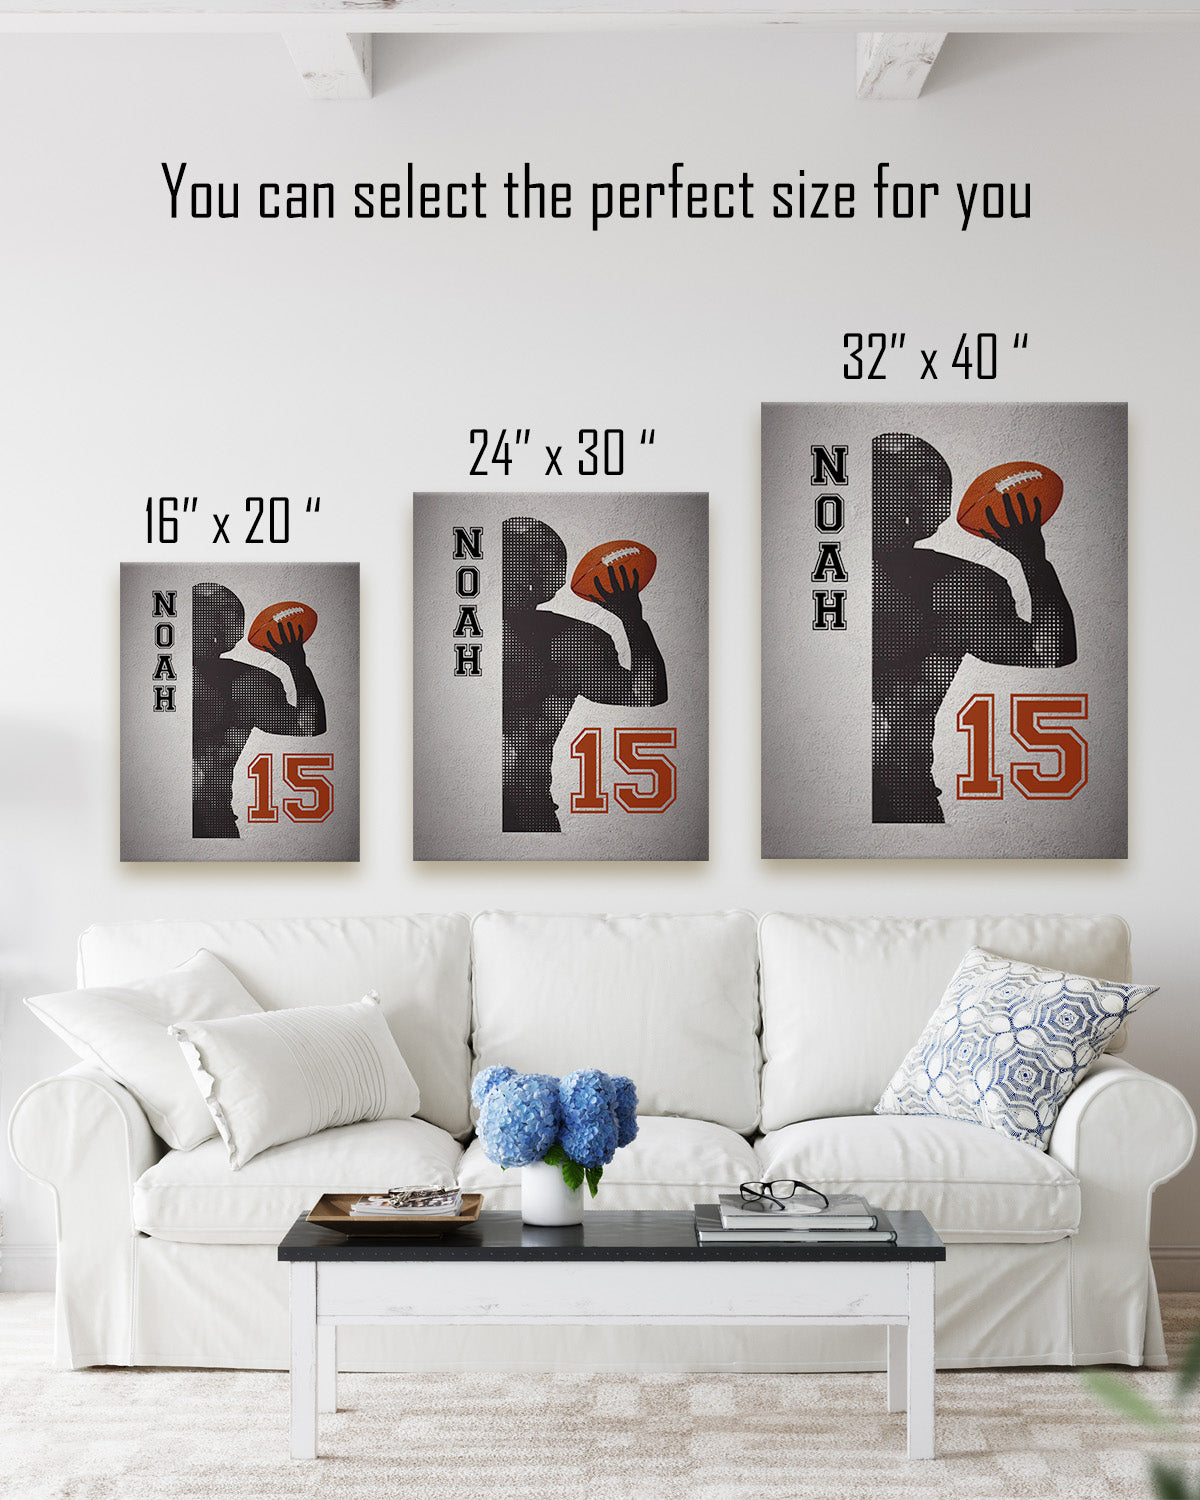 Football Wall Art for Boys Bedroom, Locker Room, or Coach Gift - Customizable with Last Name & Jersey Number - Motivational and Inspirational Football Quotes